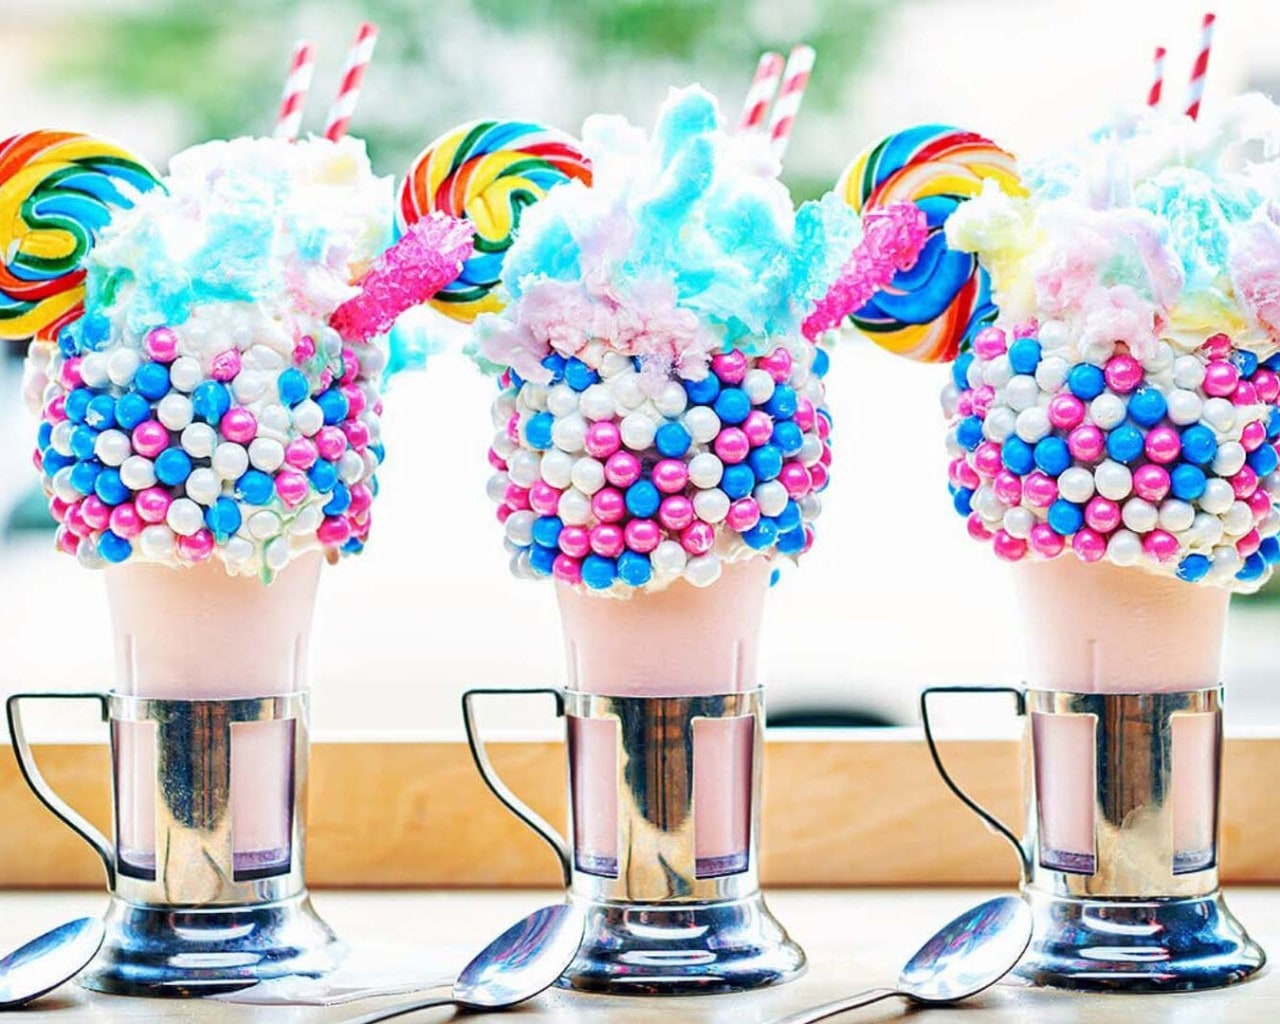 Three colourful milkshakes topped with candy floss and candies to pair your burgers for dinner